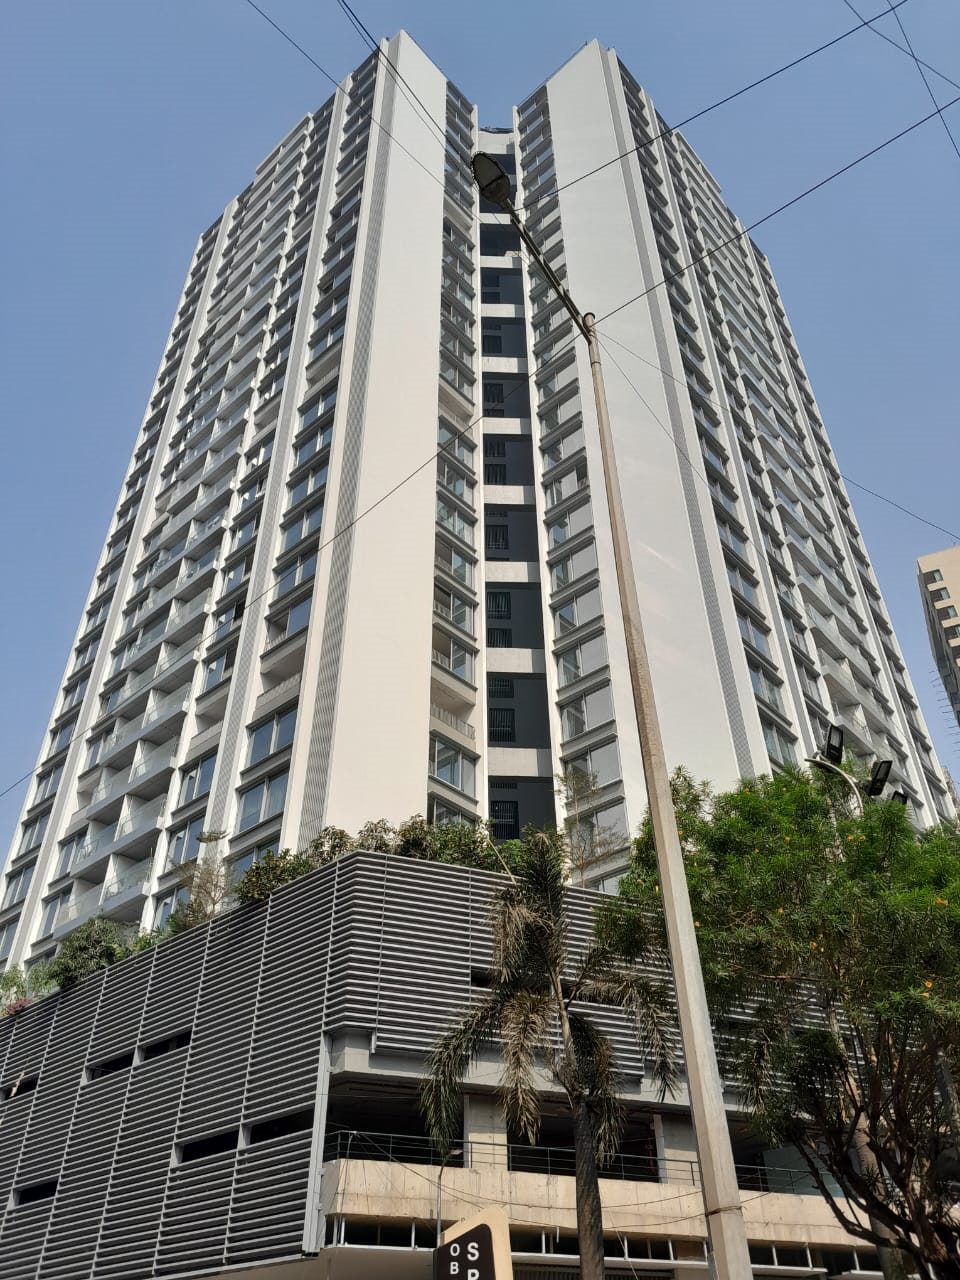 3 BHK Flat for Sale in Andheri East - Oberoi Maxima